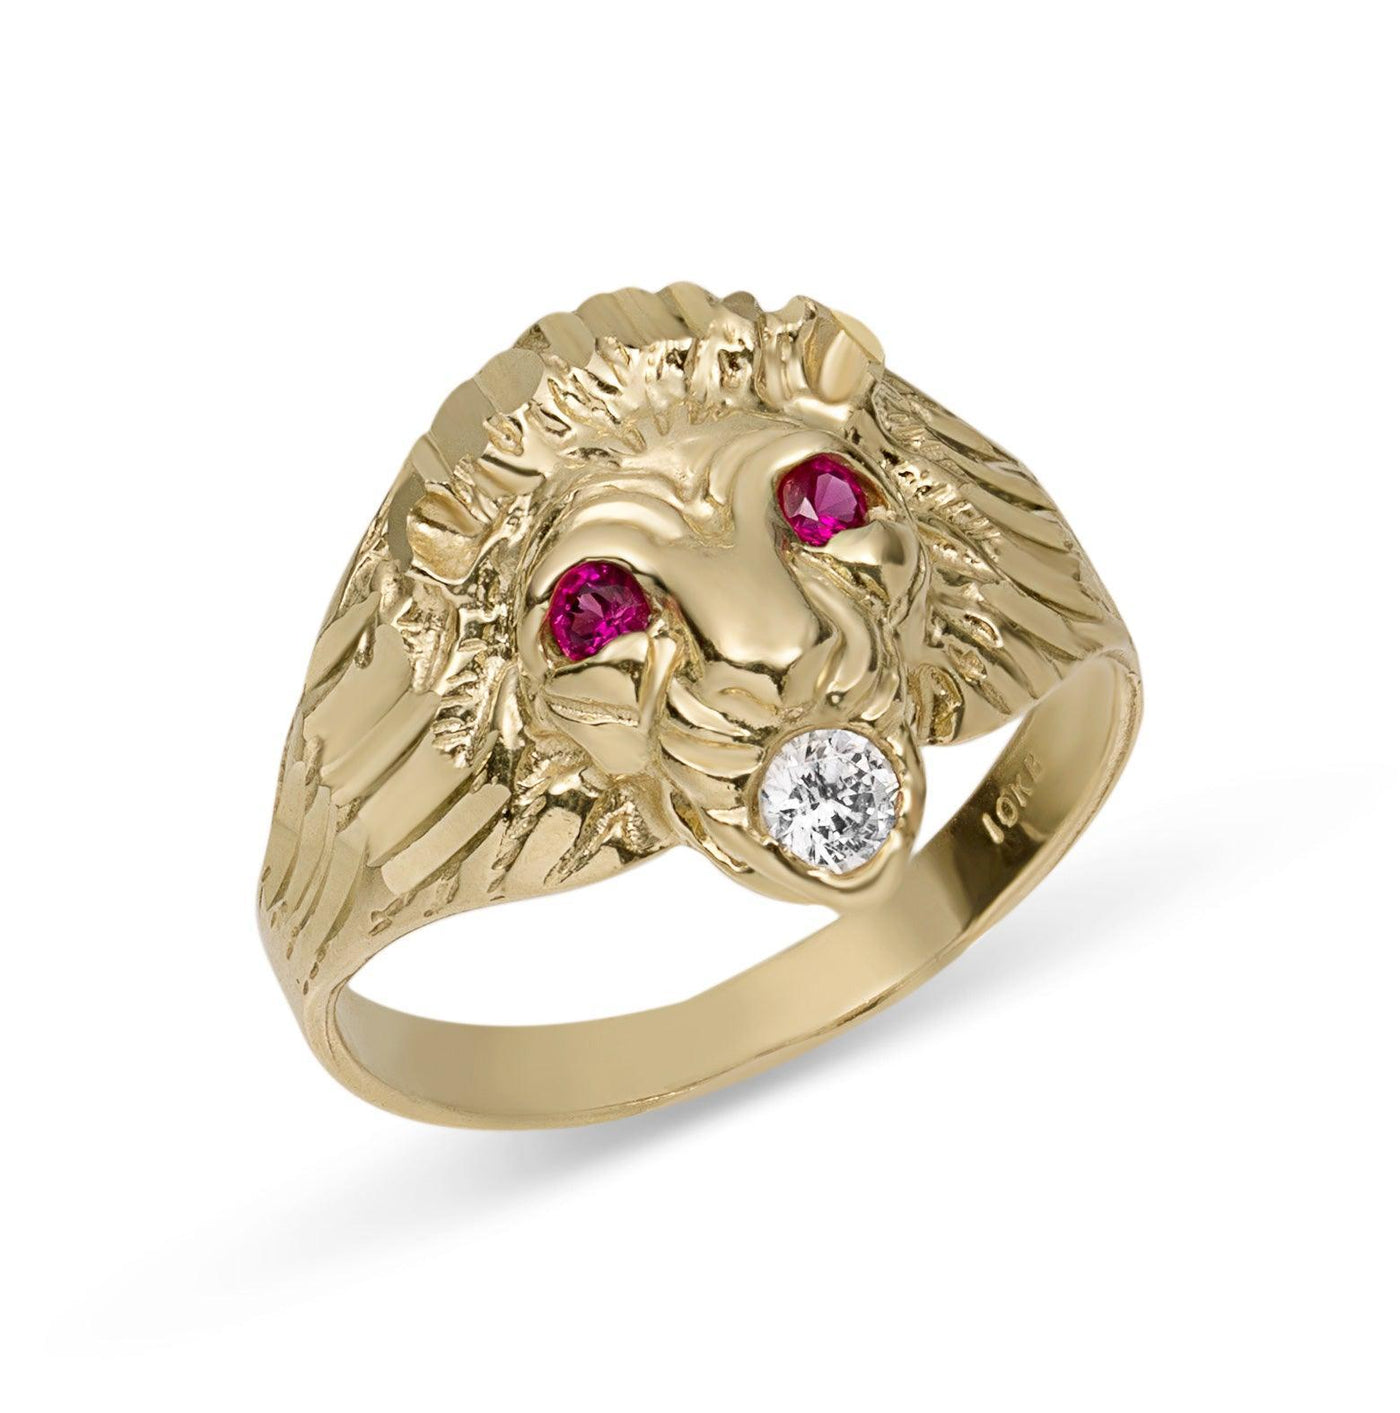 Men's Unisex Lion Head Ring Ruby Eyes & CZ Solid 10K Yellow Gold Size 11 - bayamjewelry